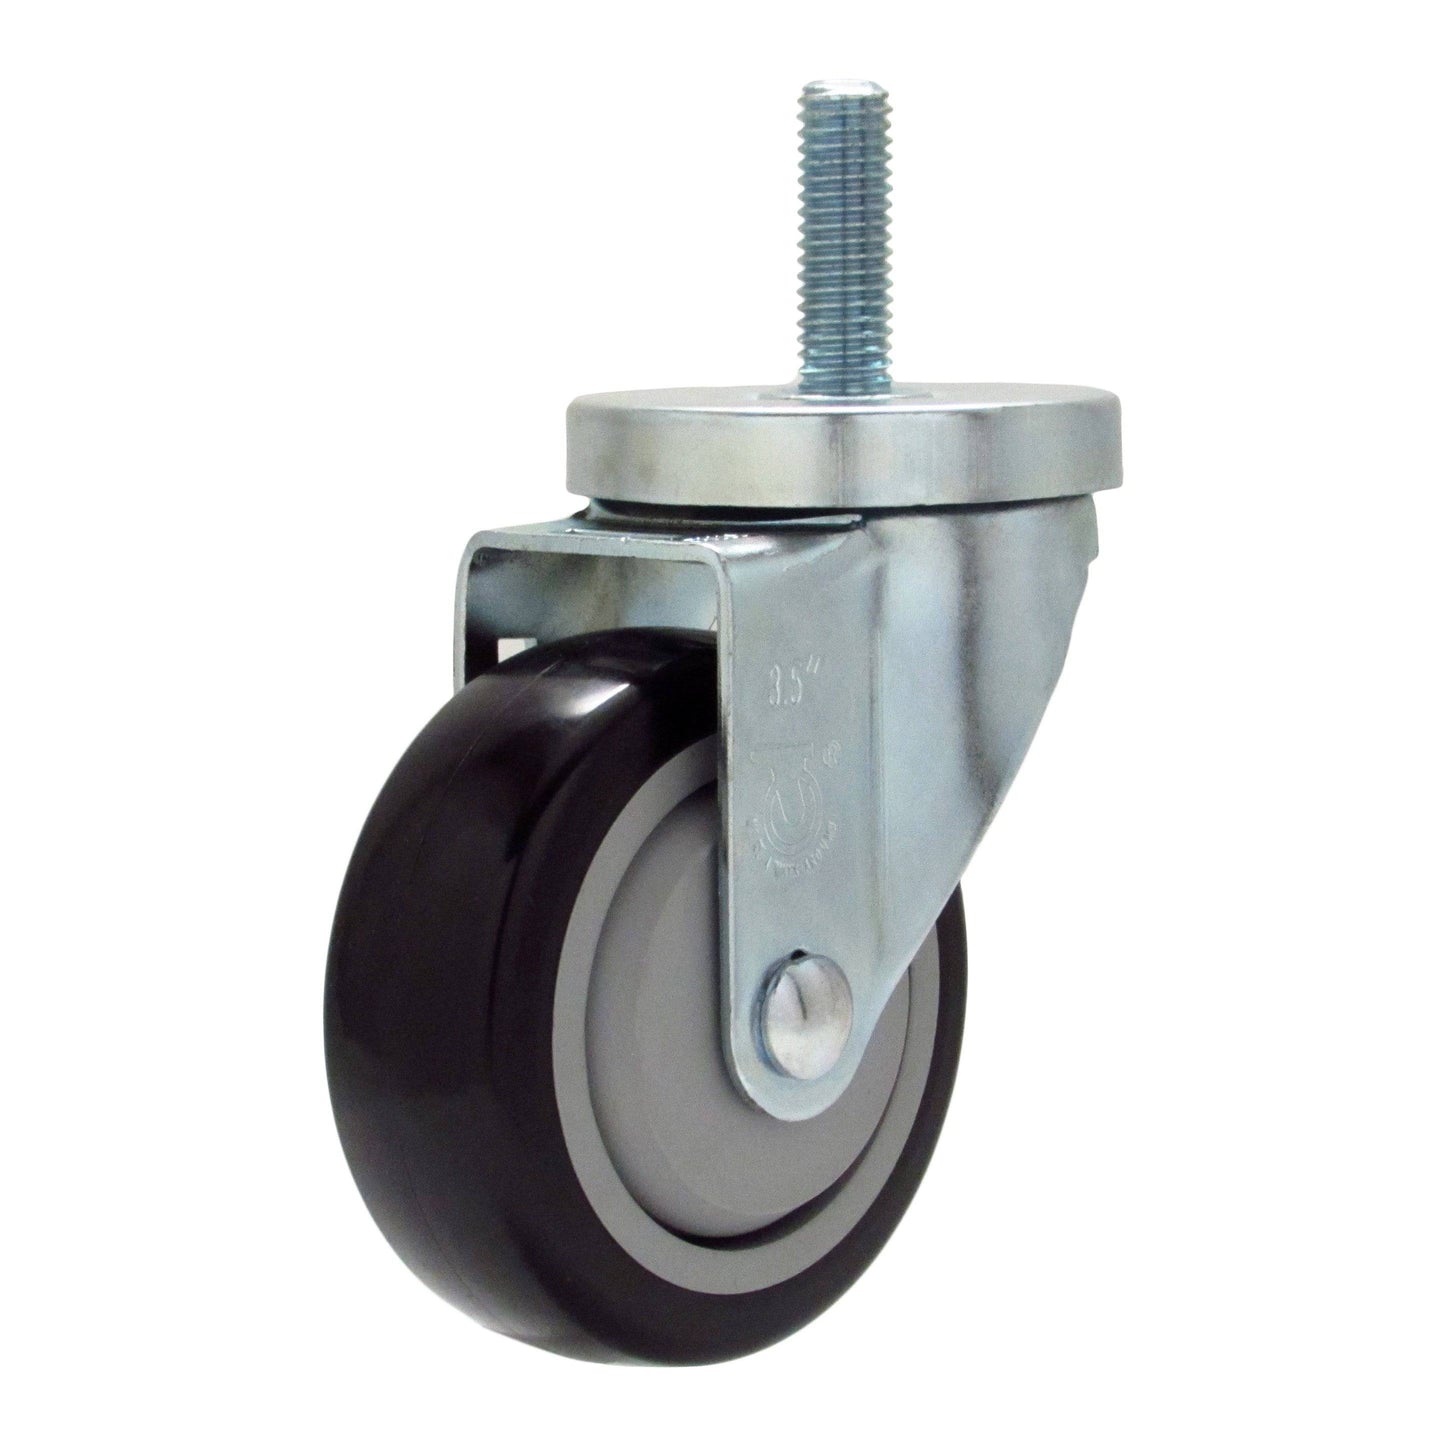 3-1/2" x 1-1/4" Poly-Pro Wheel Threaded Swivel Stem Caster - 300 lbs. capacity - Durable Superior Casters